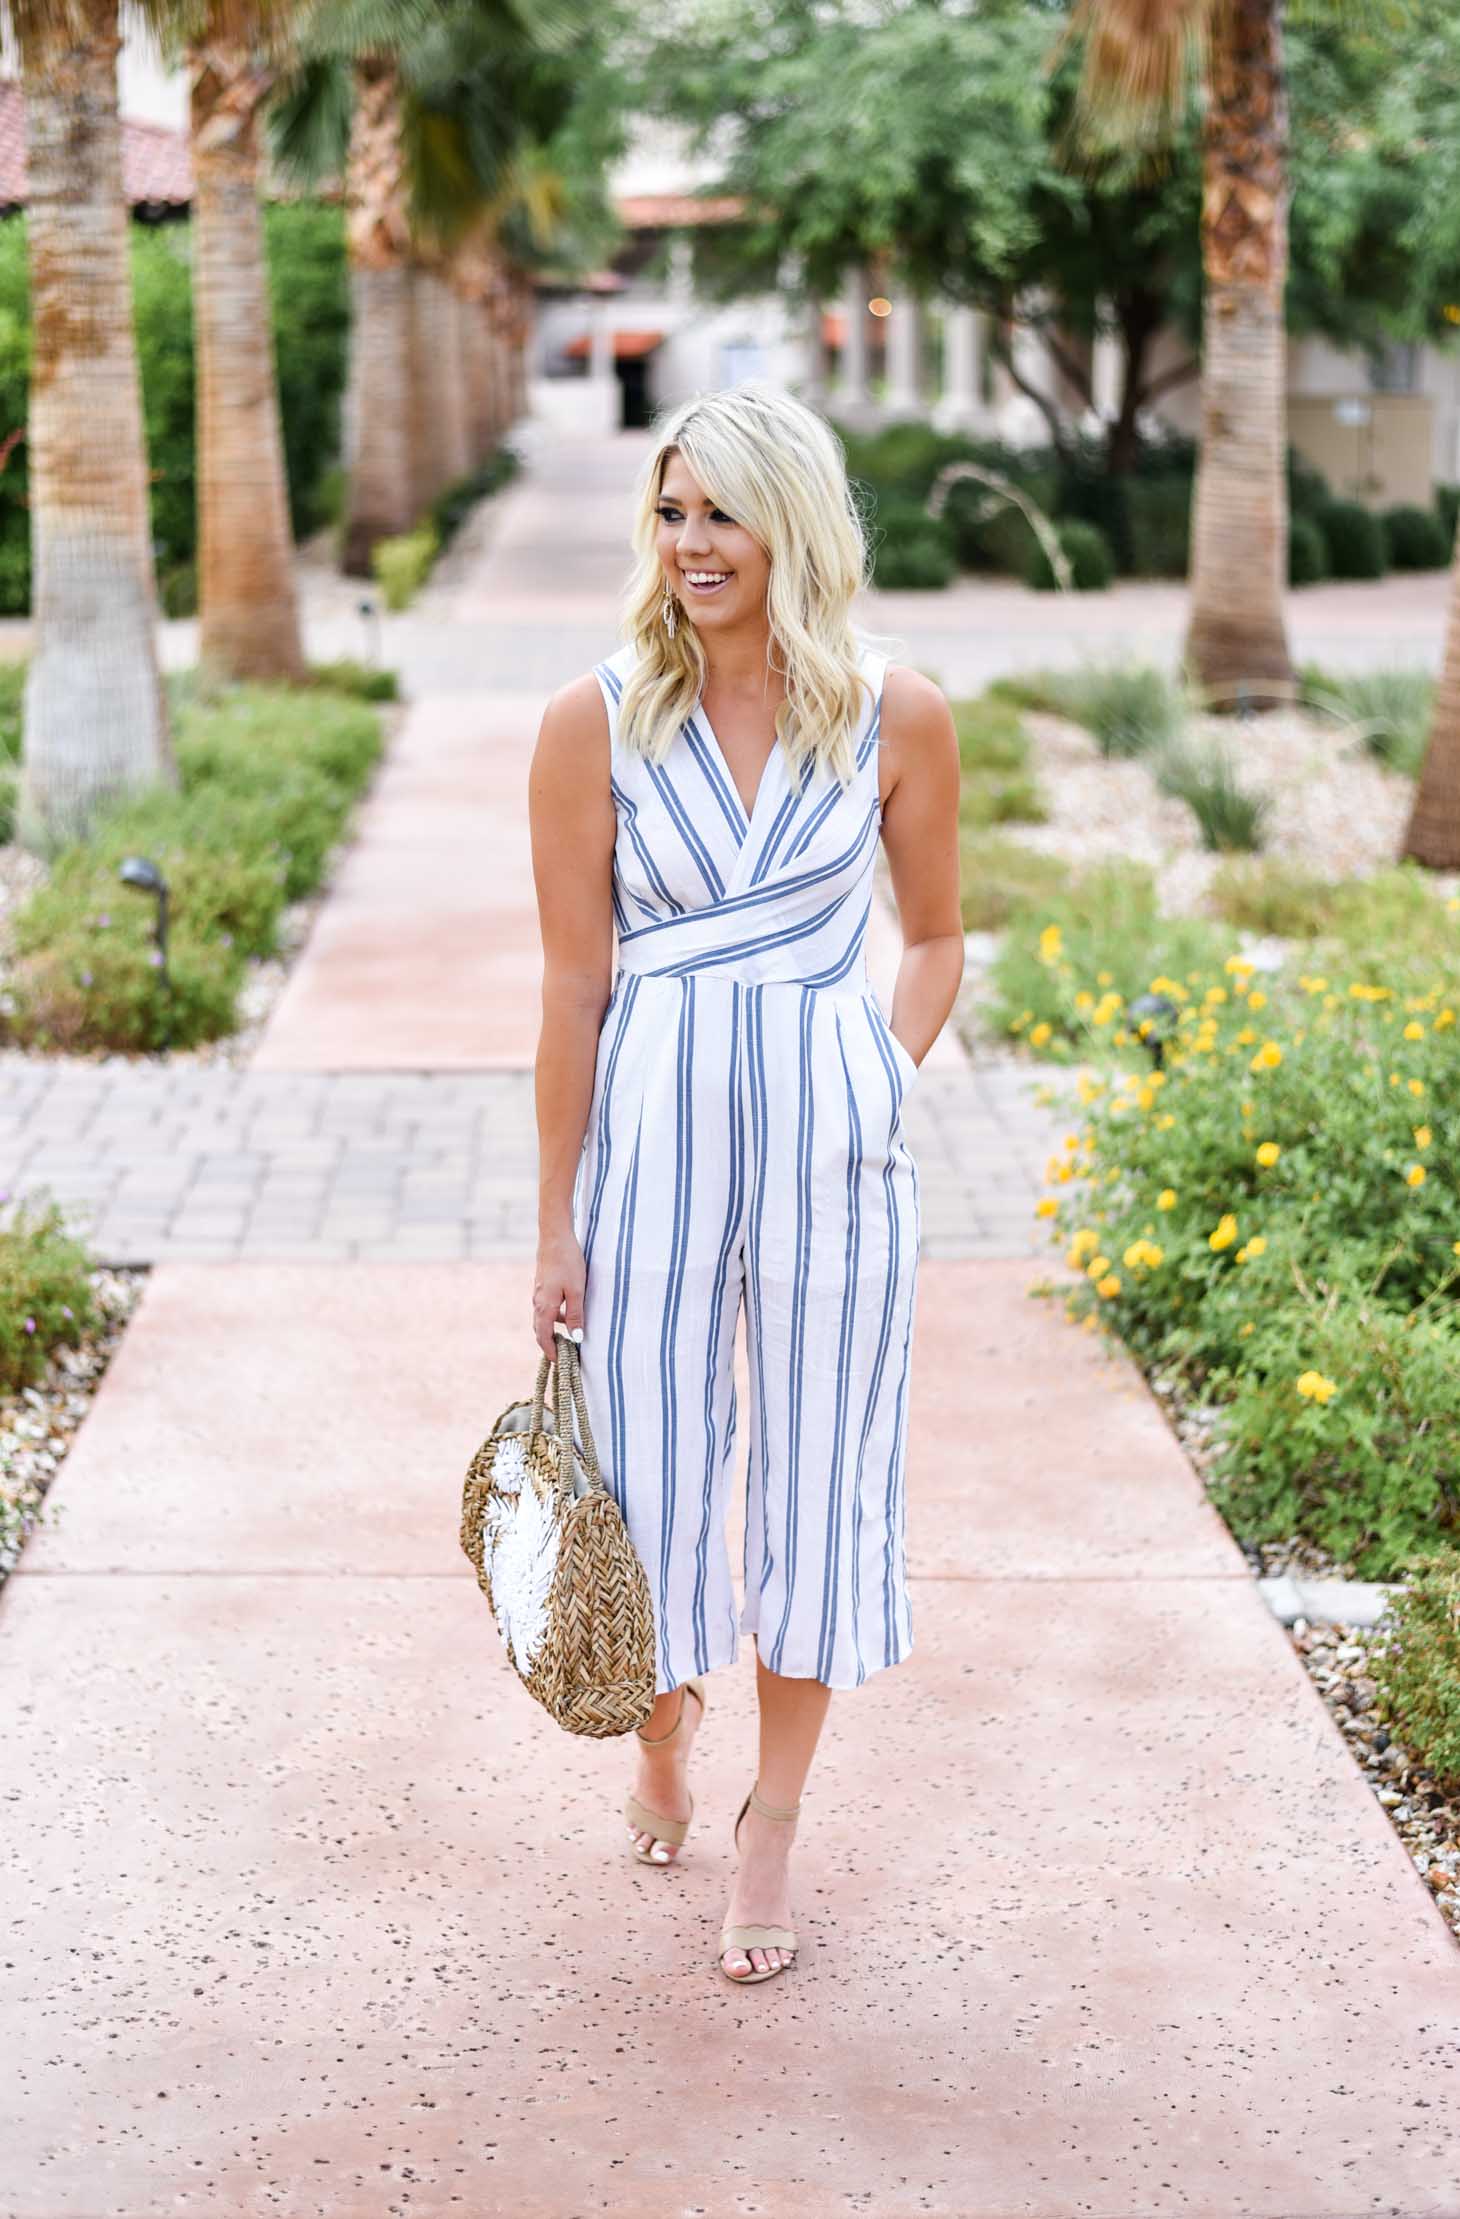 Erin Elizabeth of Wink and a Twirl shares this Vici Dolls striped jumpsuit